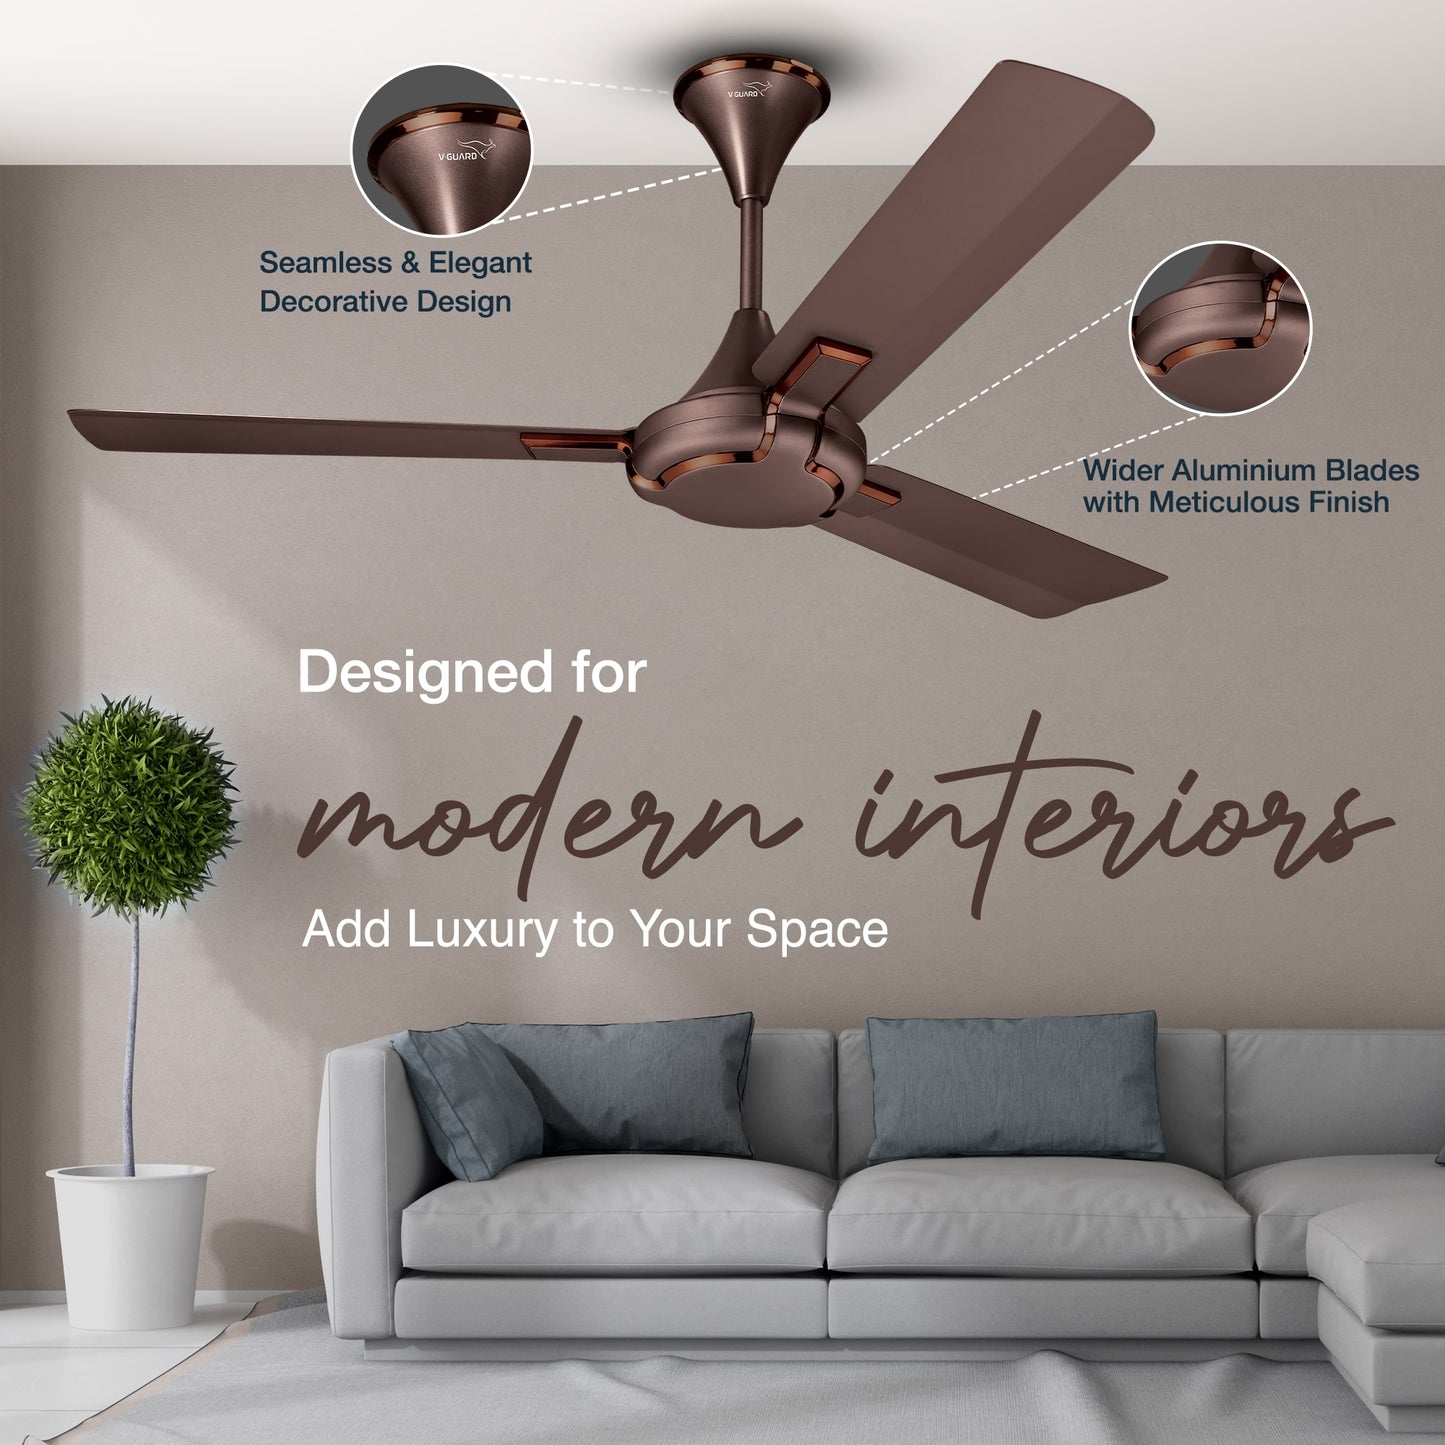 Exado Pro AS Anti Dust High Speed Ceiling Fan for Home 1.2 m, Elegant Brown